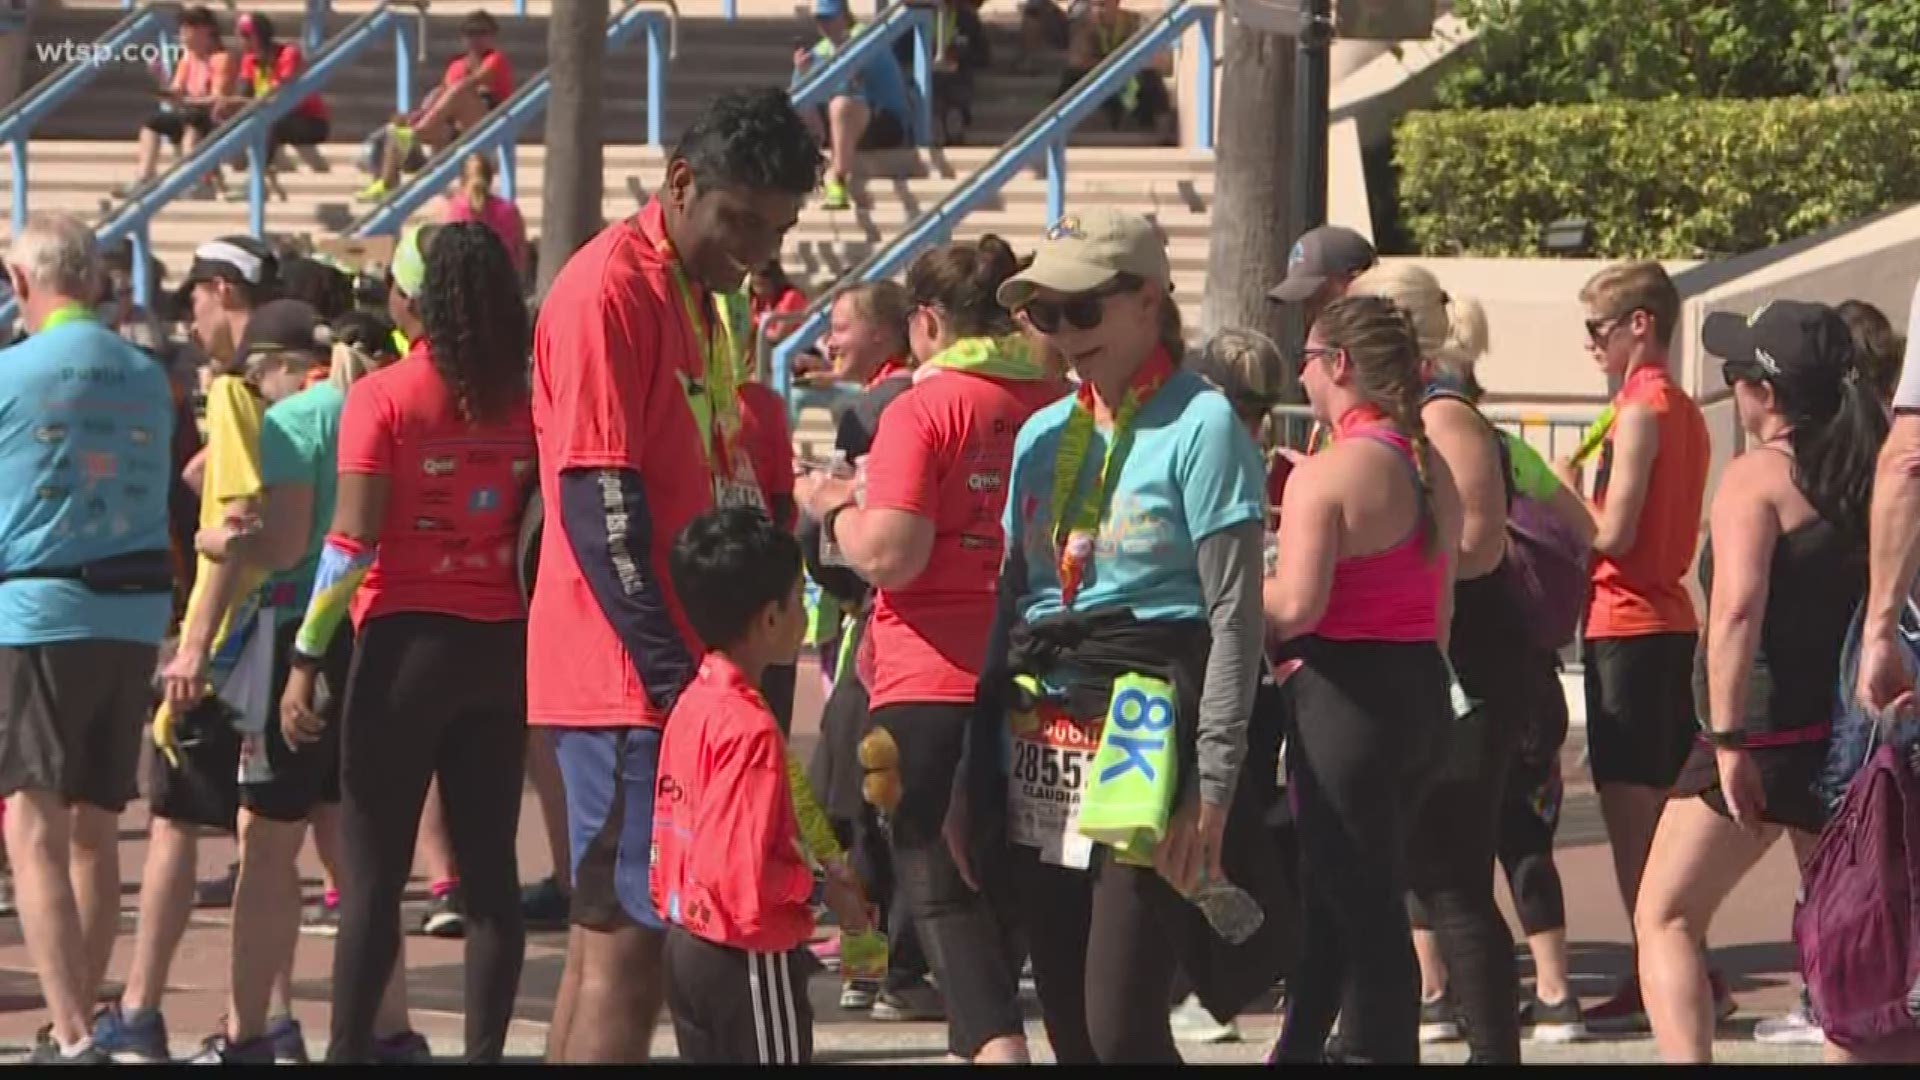 Technology helped Tampa police find a teen who had autism during the Gasparilla run Sunday.